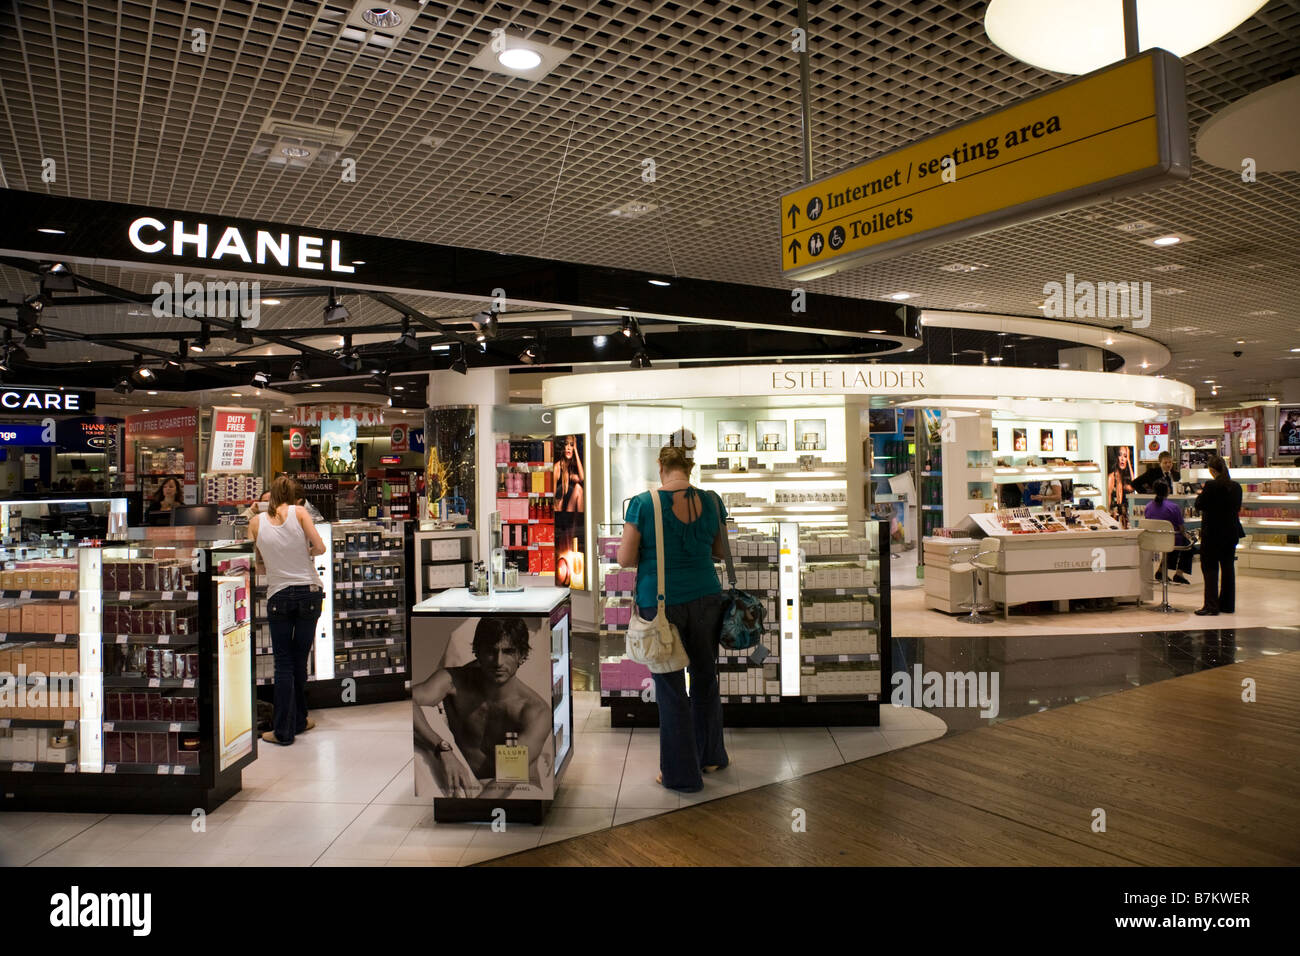 Luxury goods / Chanel perfume / perfumery / cosmetics shop / outlet in  departure lounge at London Heathrow airport Terminal 3 Stock Photo - Alamy